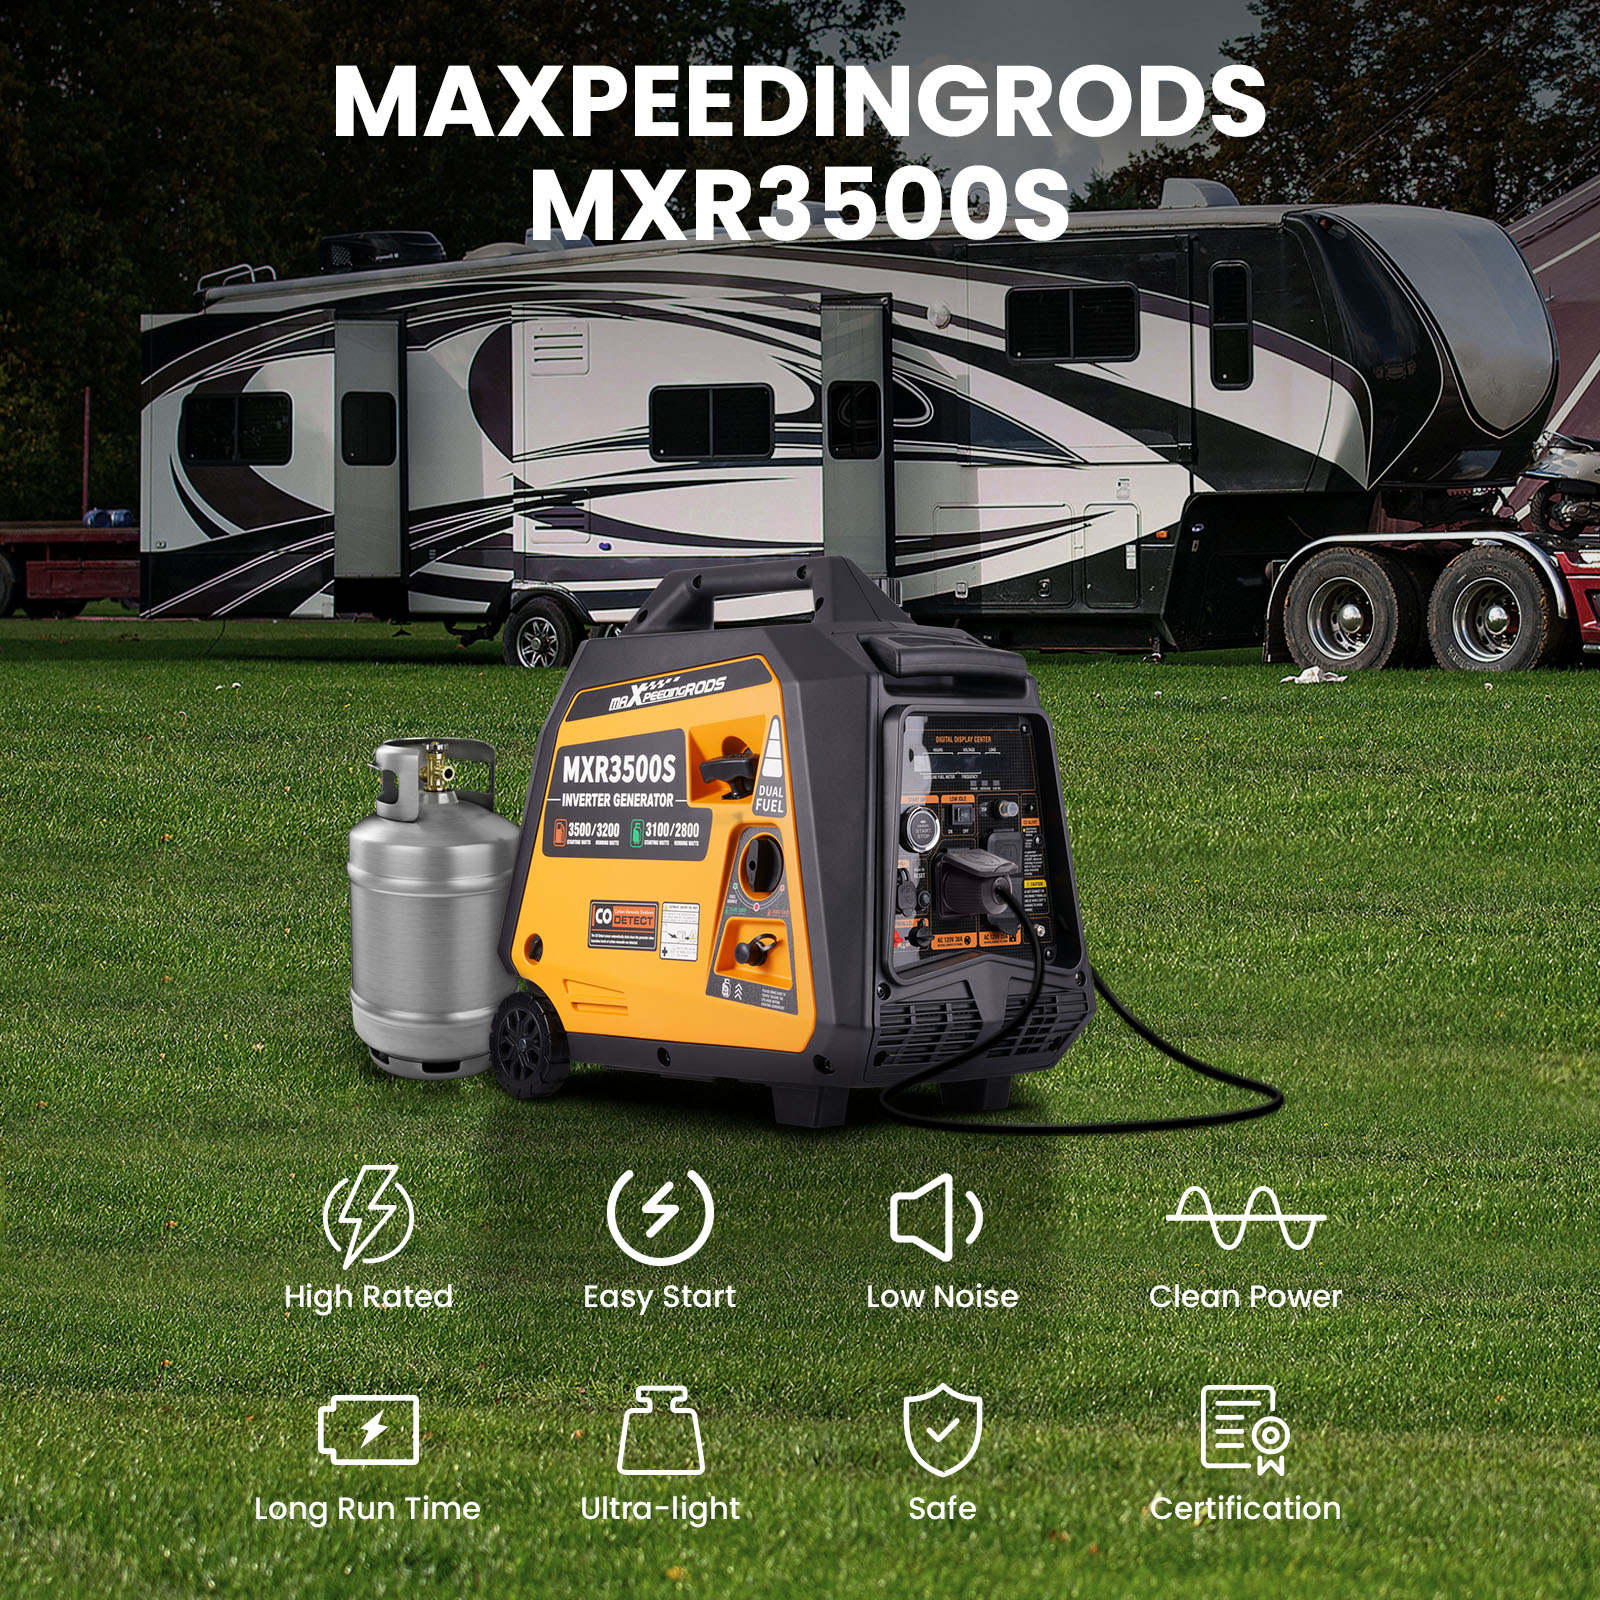 MaXpeedingrods 3500 Watt Portable Inverter Generator Gas Powered, EPA  Compliant, Compact and Lightweight for Home Backup Power, Outdoor Camping,  RV